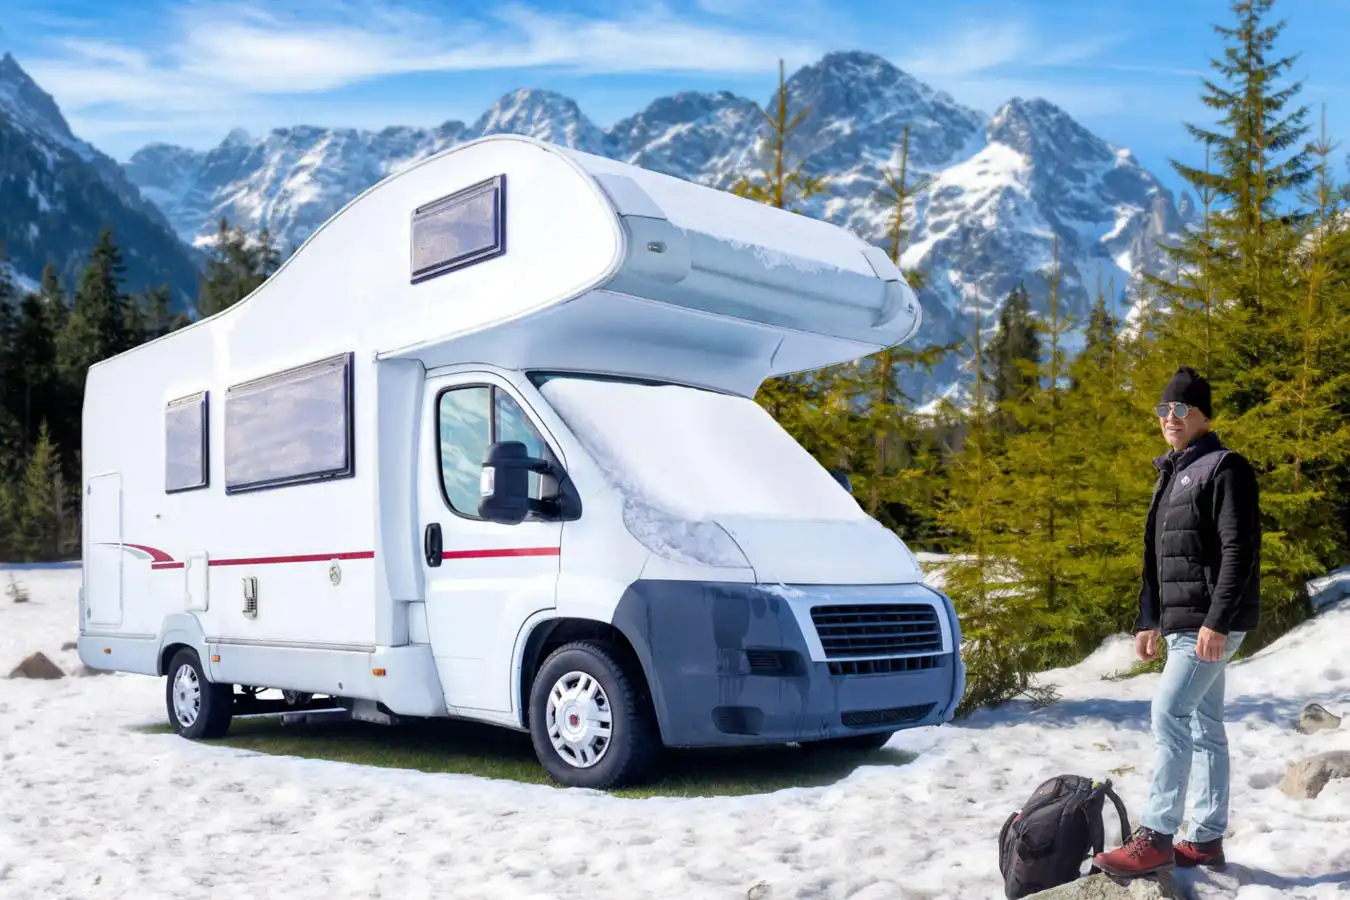 About Winterize a Camper